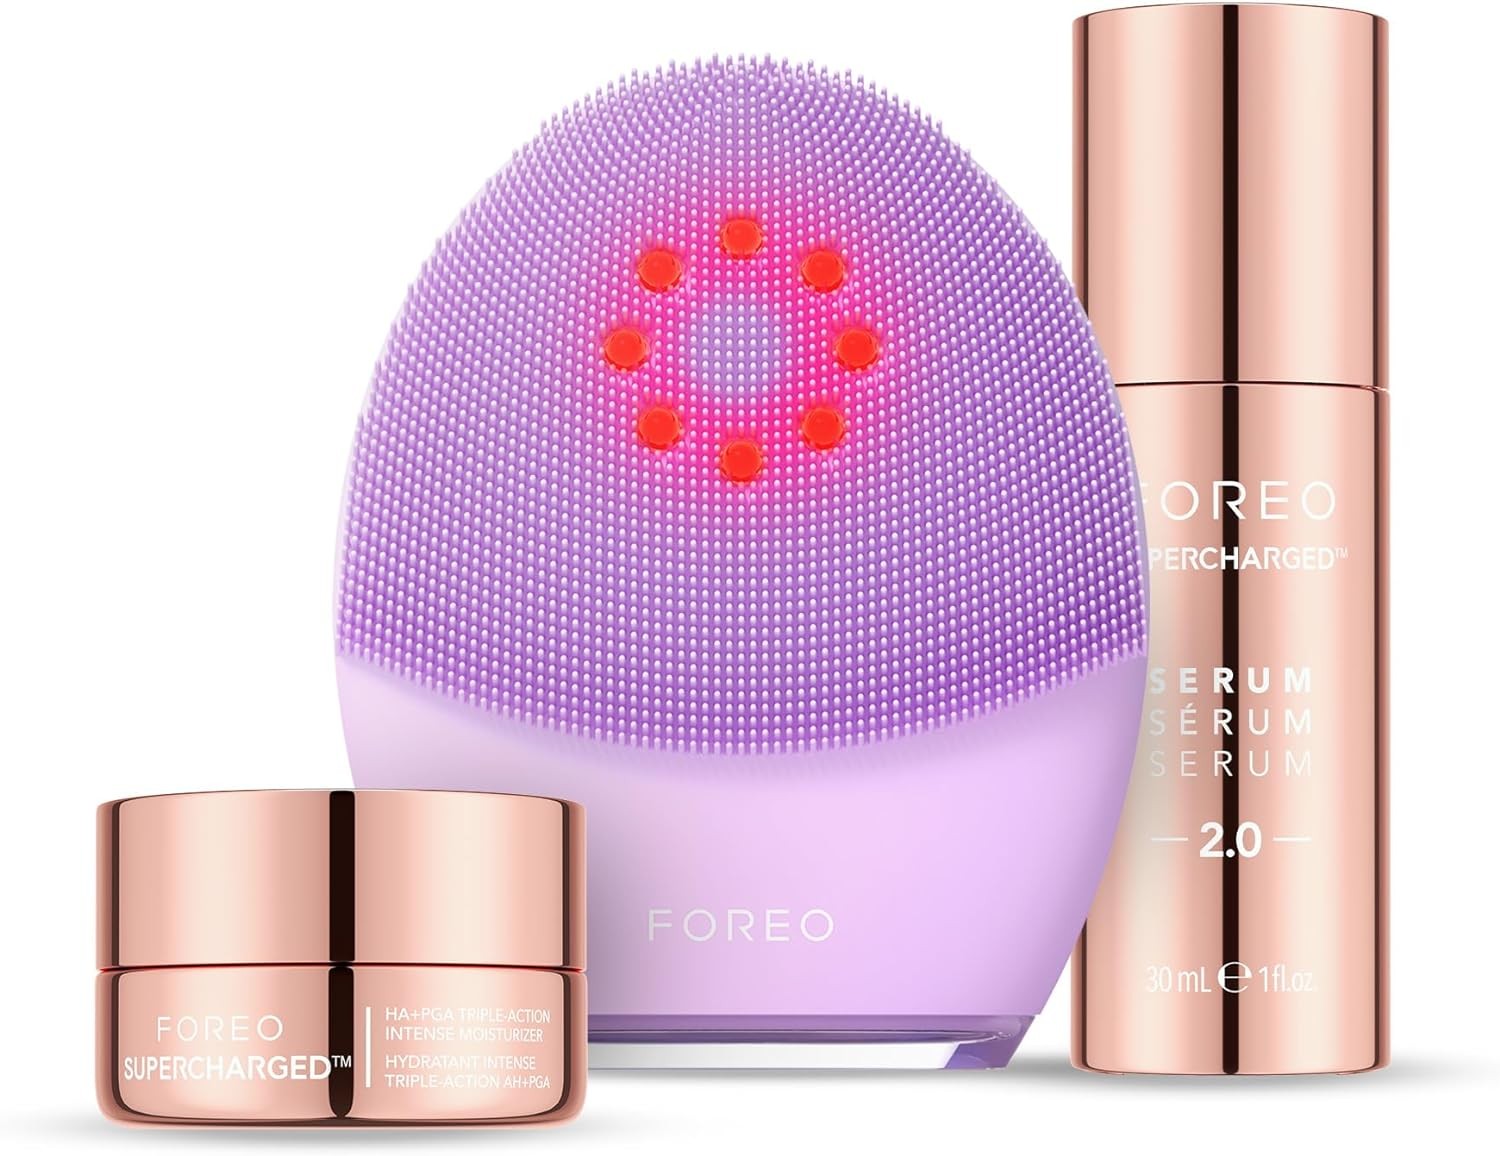 Foreo Clean & Firm Bundle - Luna 4 Plus Cleansing Brush + Supercharged SERUM 2.0 & Hydrating Night Mask